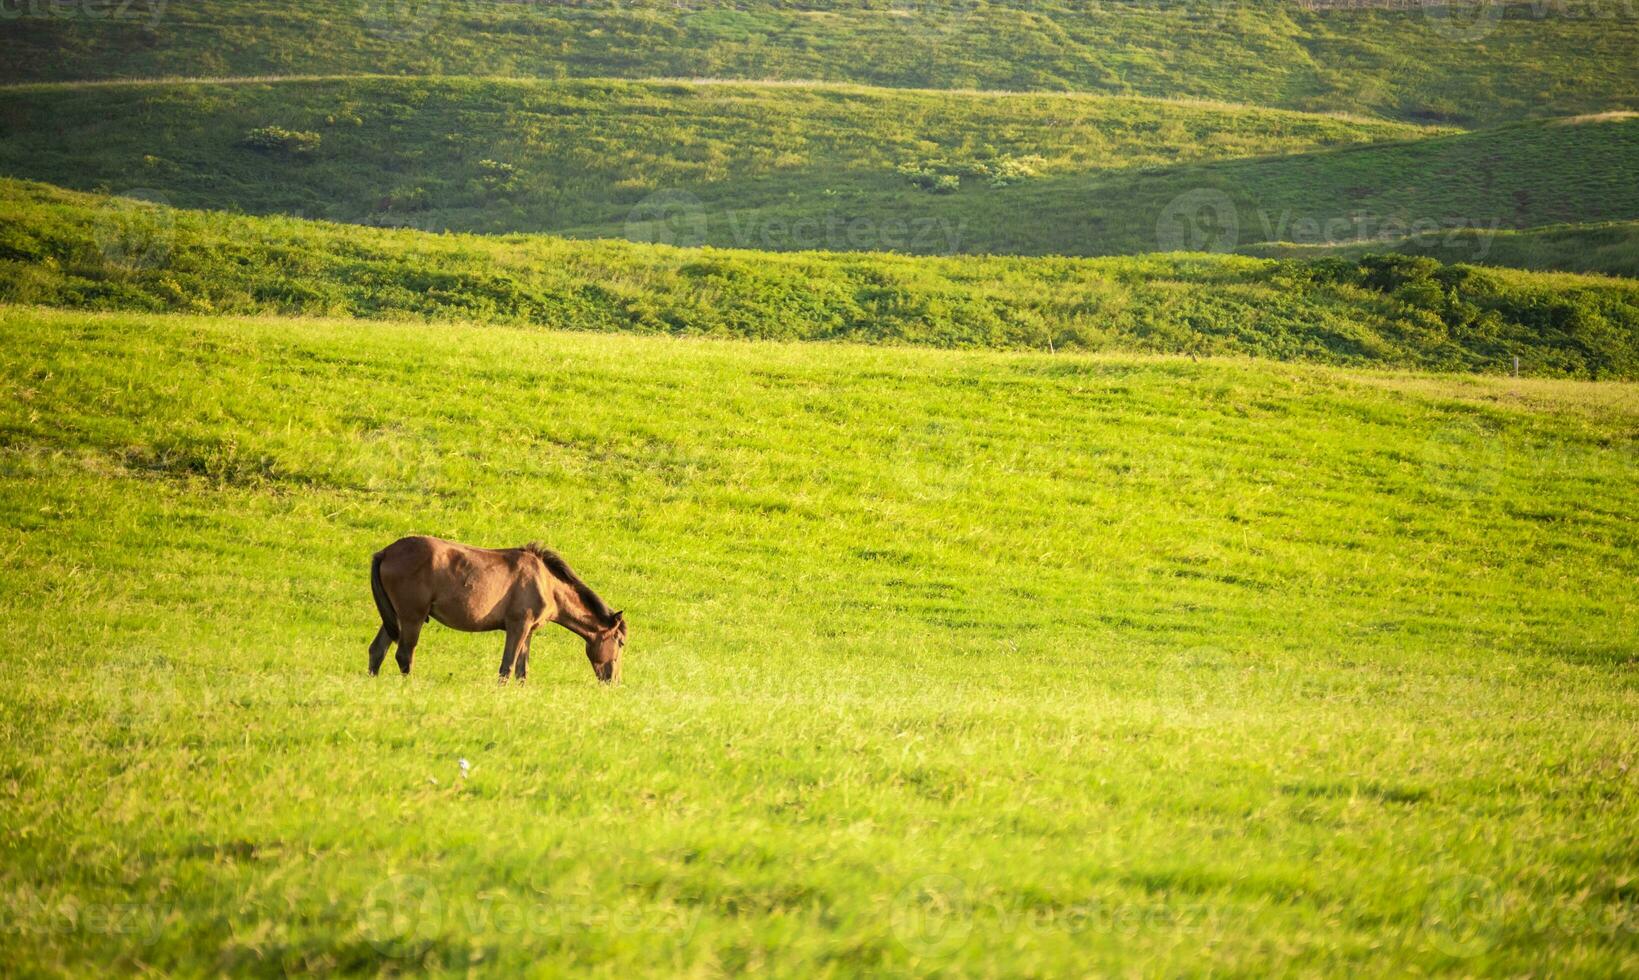 Horse in the green field eating grass, a brown horse grazing in the green field photo